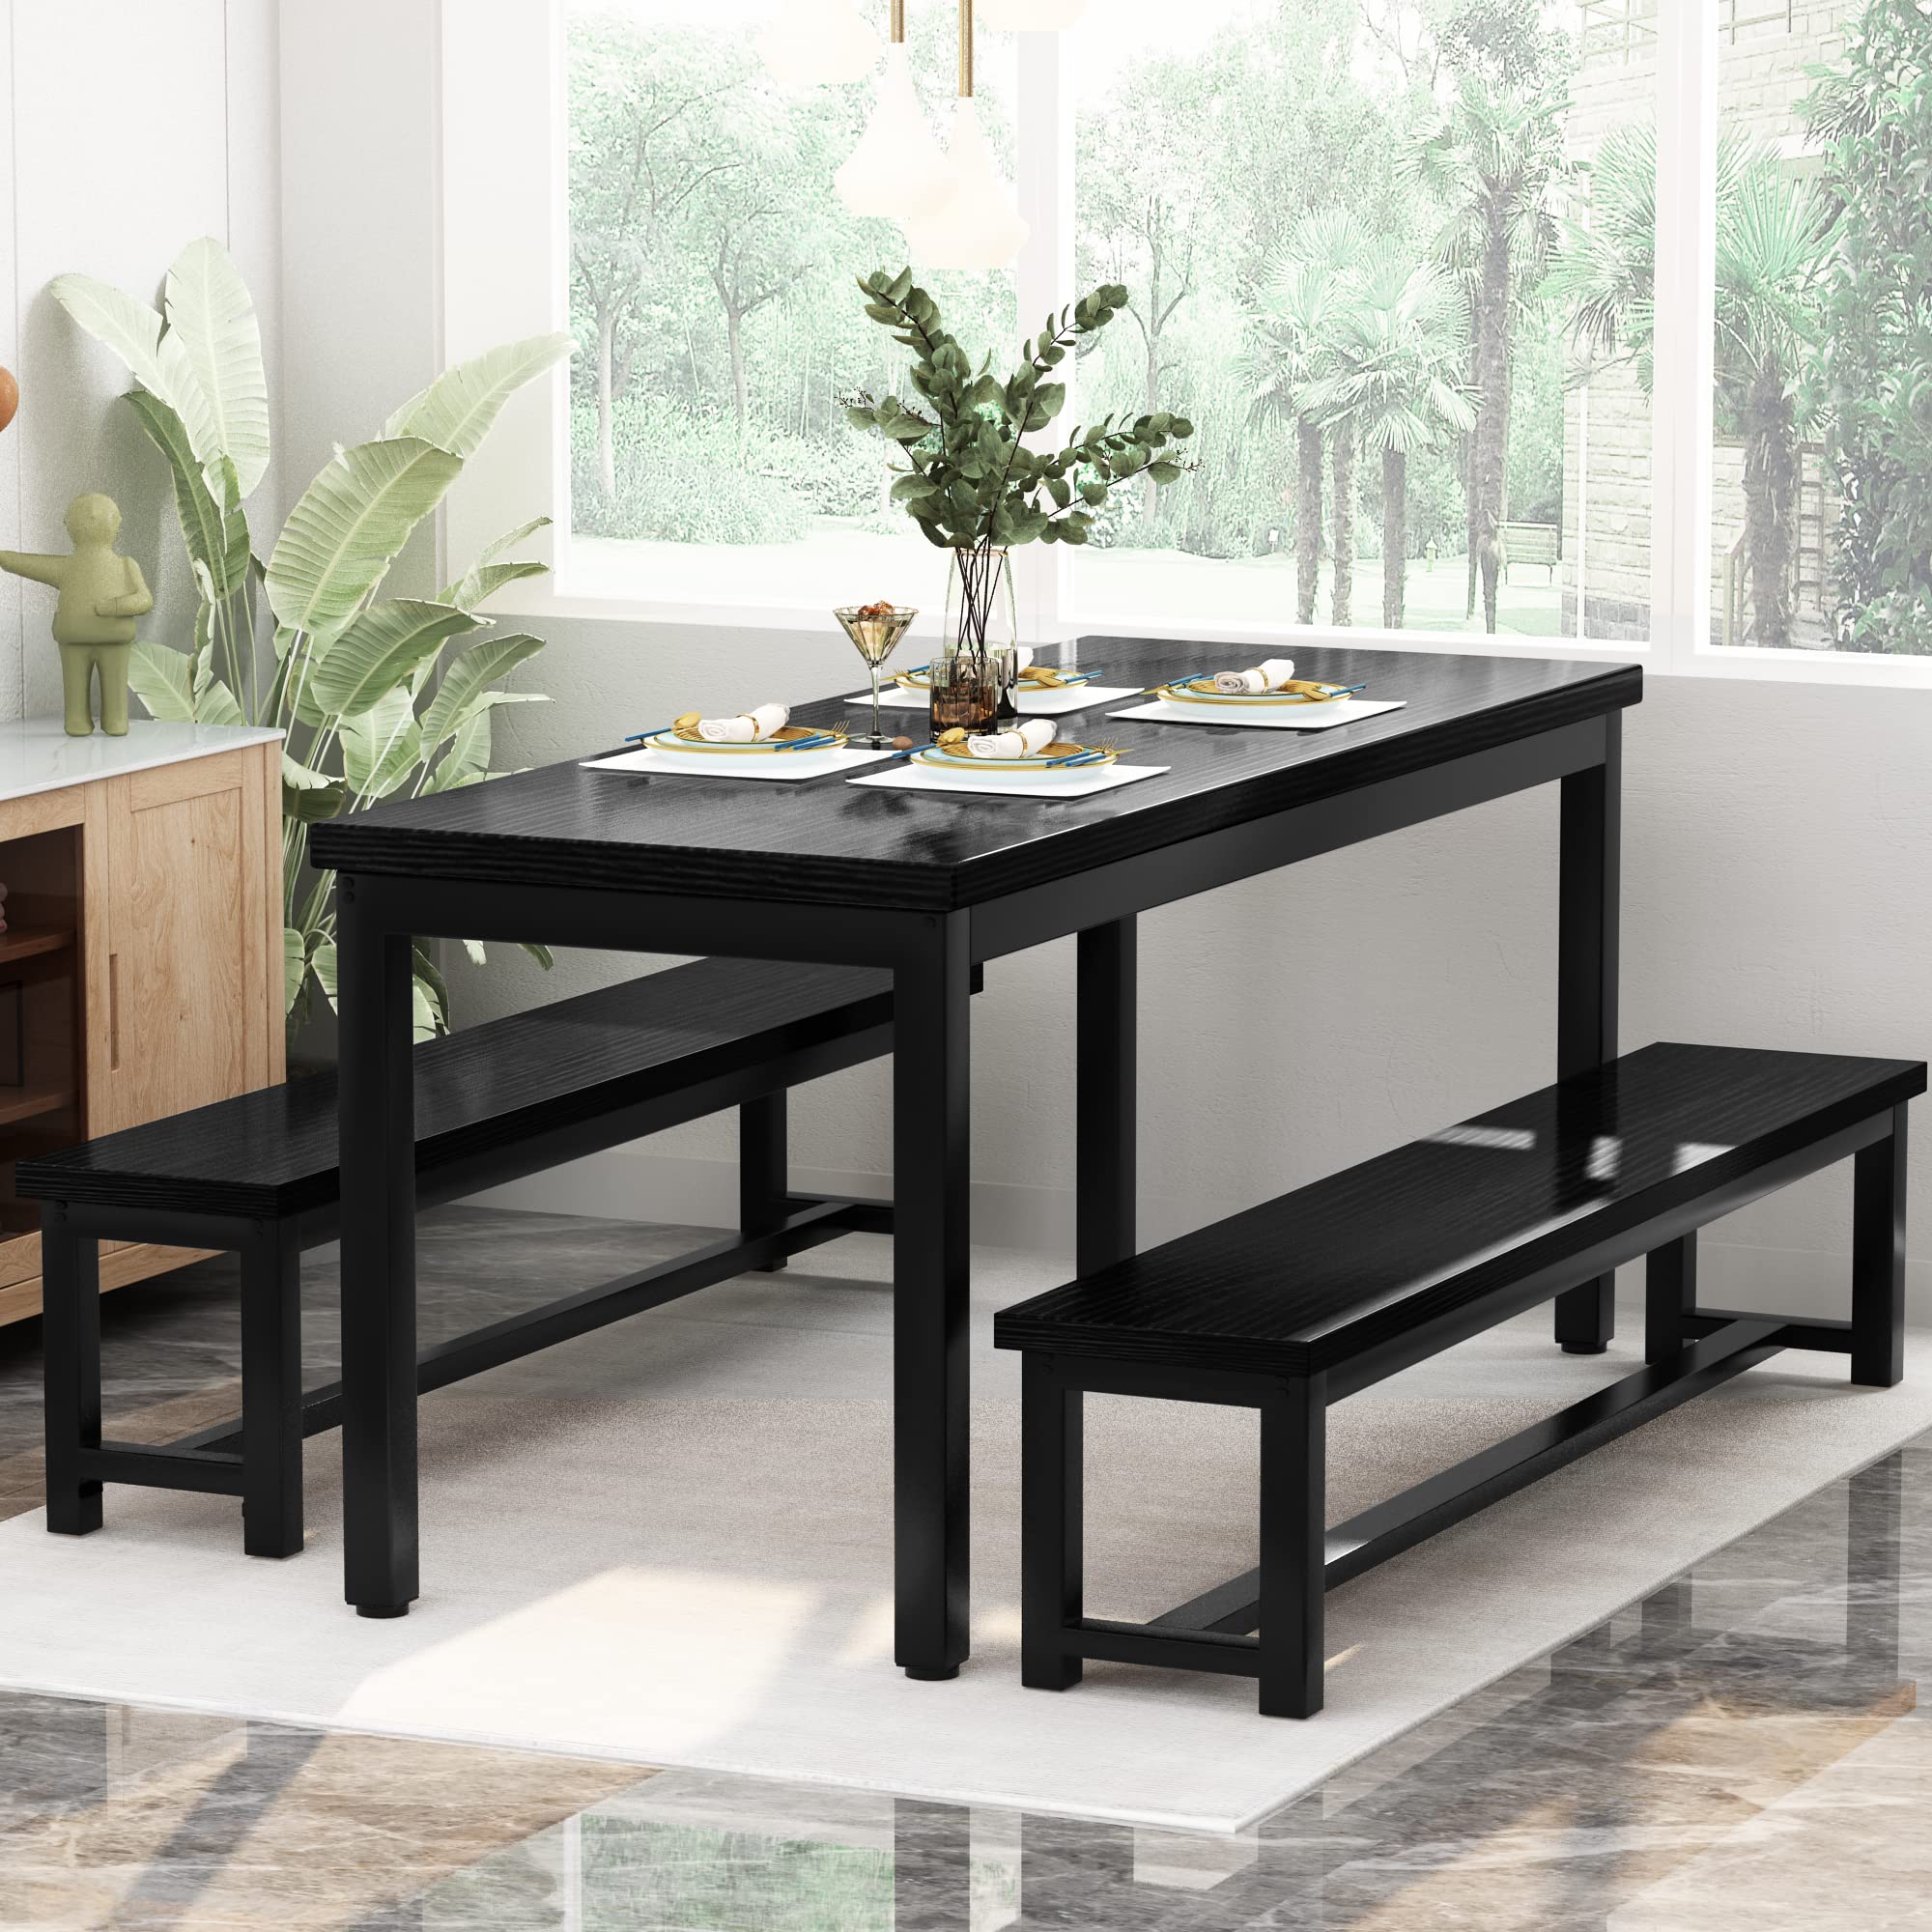 AWQM Dining Room Table Set, Kitchen Set with 2 Benches, Ideal for Home, and Room, Breakfast of 43.3x23.6x28.5 inches, Benches 38.5x11.8x17.5 Black